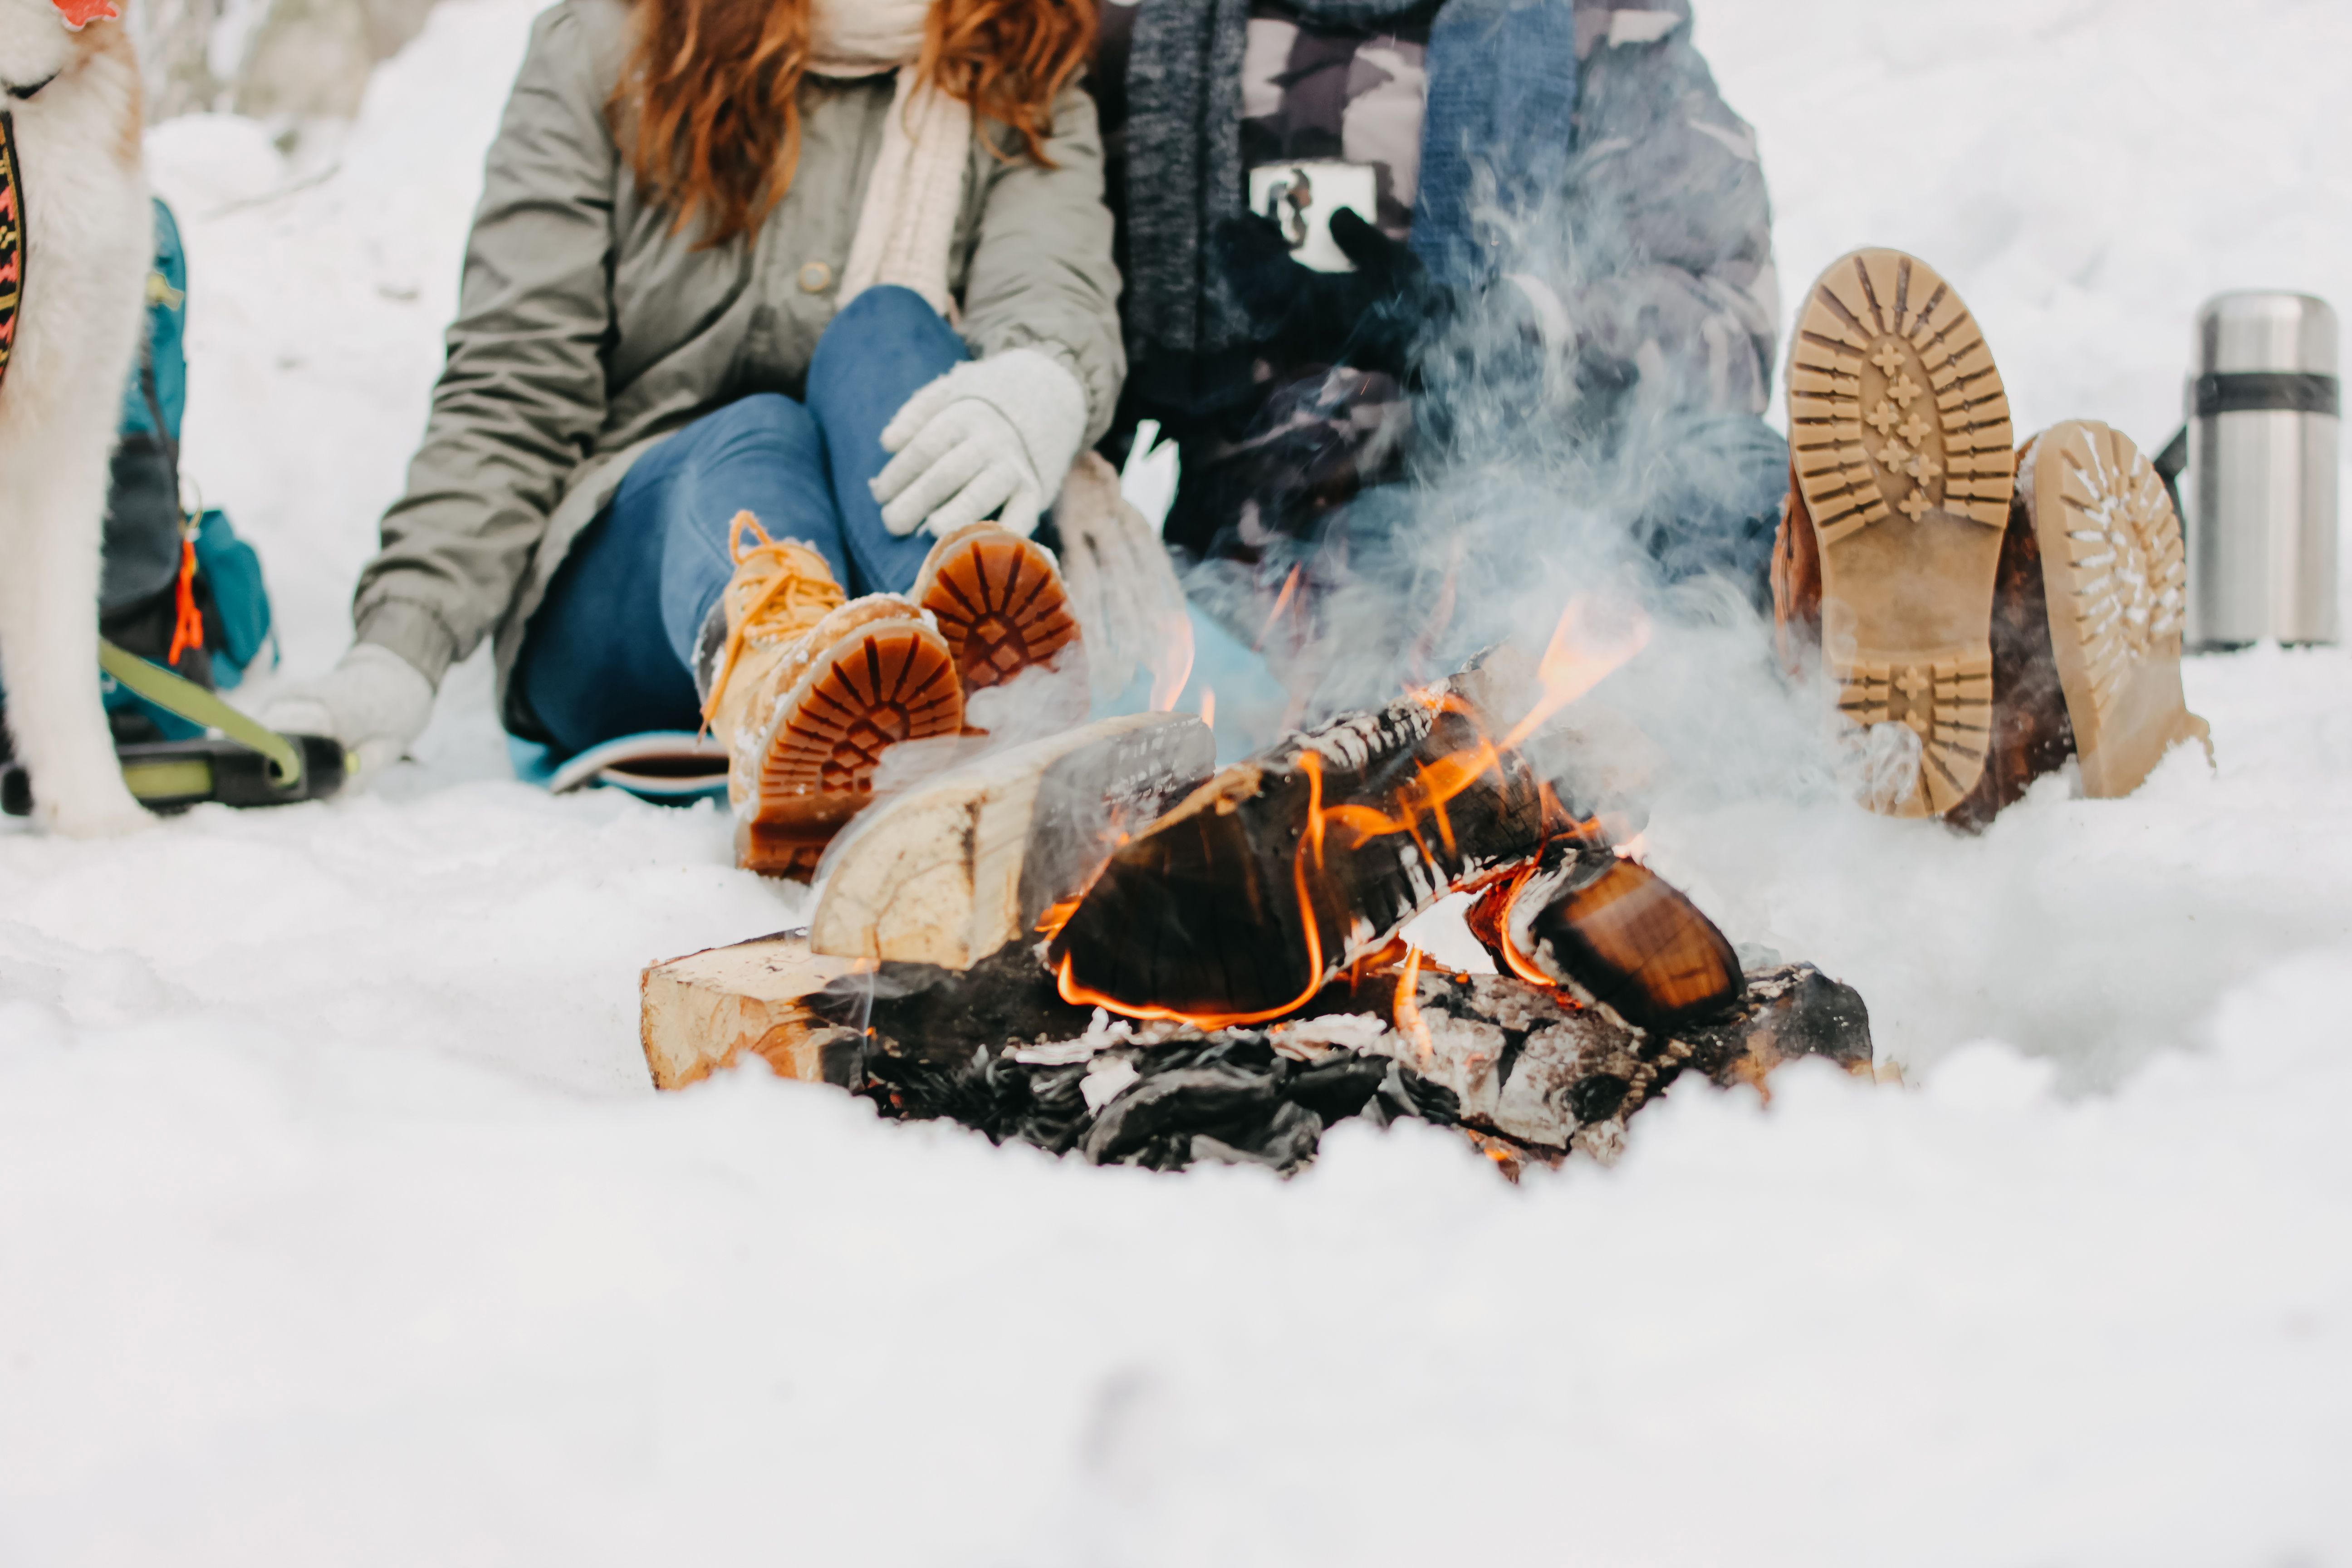 Best Ideas to Play in Snow - Fun Things to do